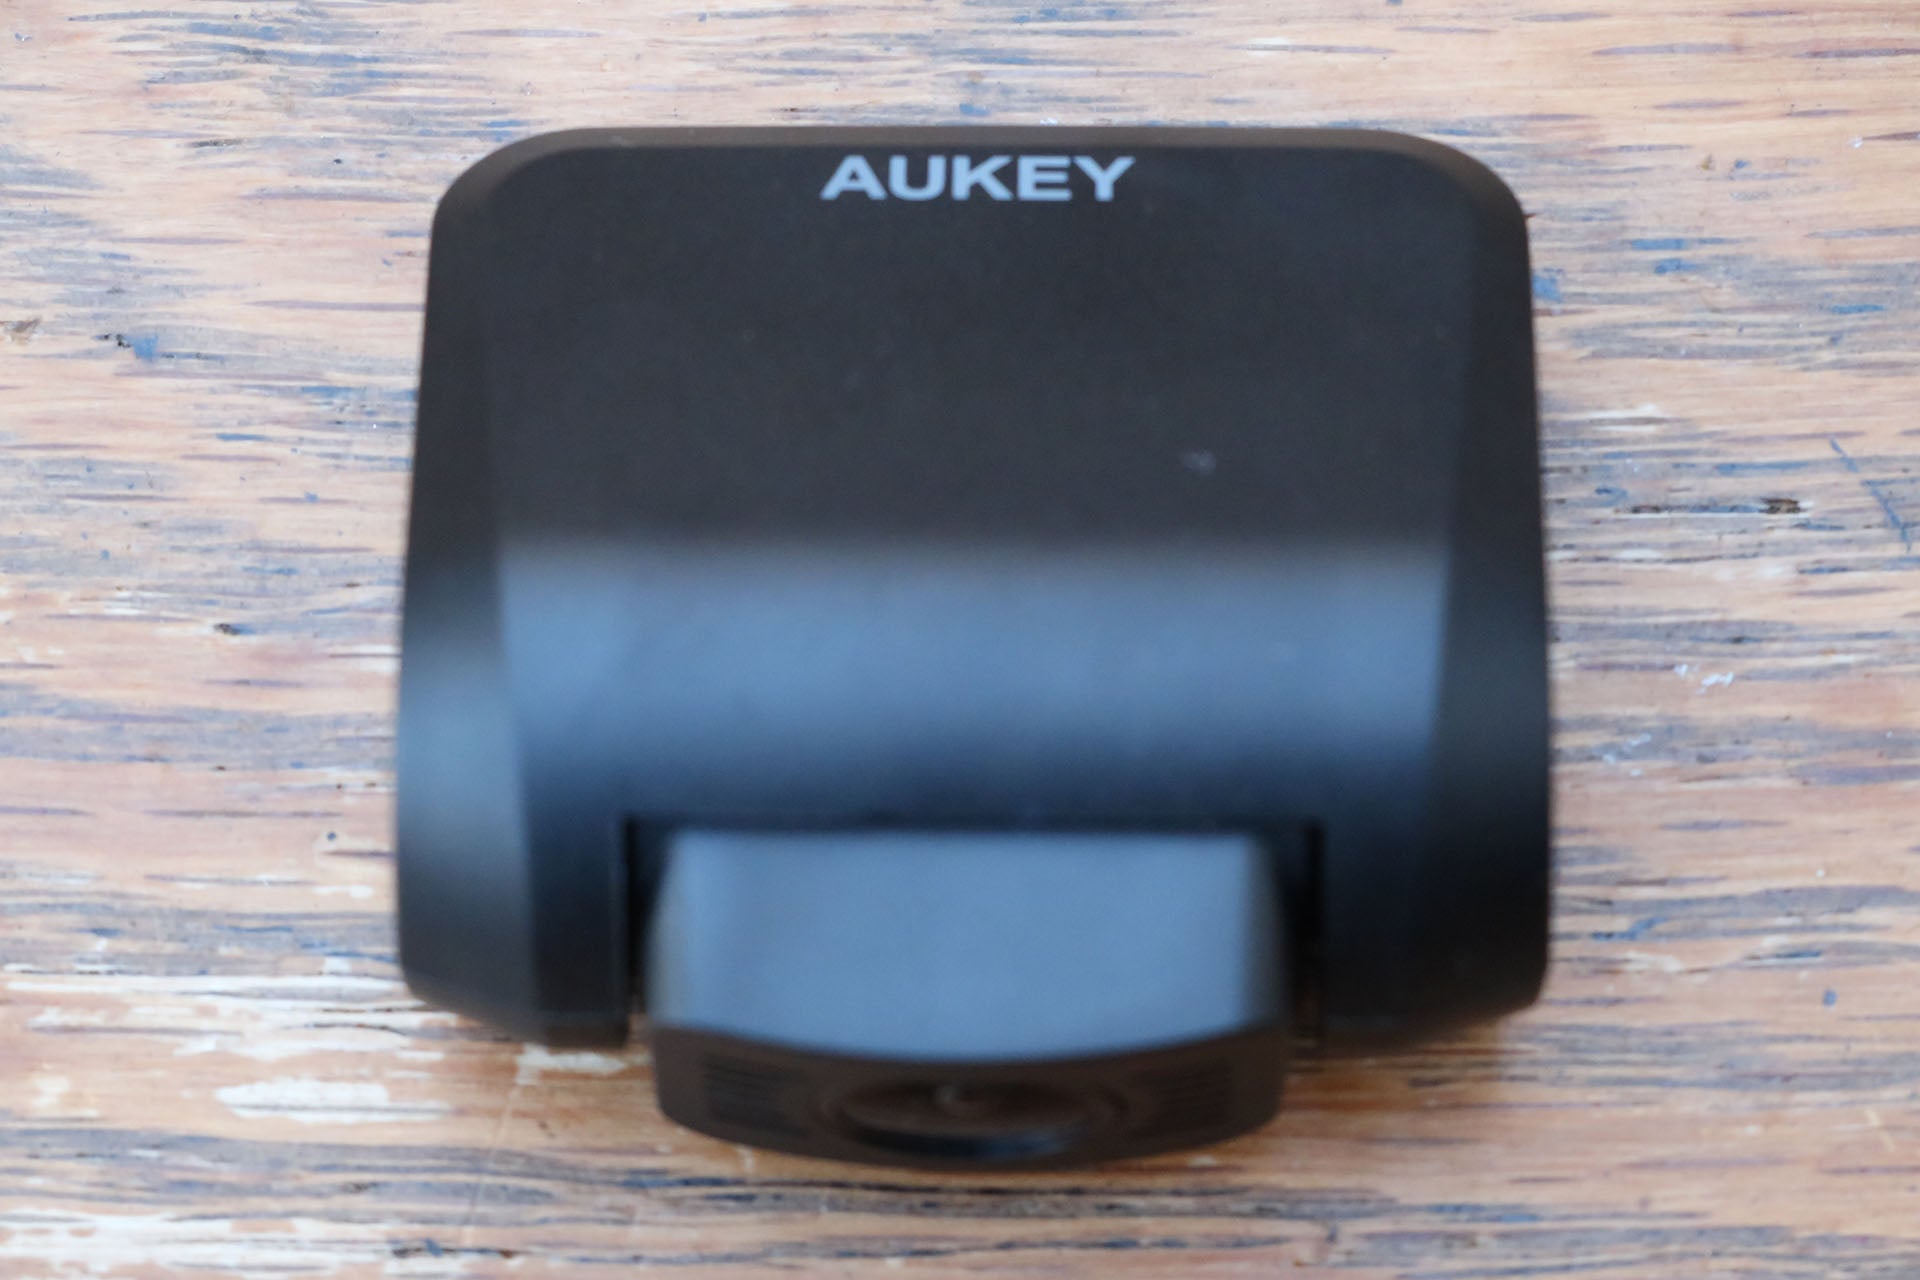 Hula hop stemme Broderskab Aukey 1080p Dual Stealth Dash Cams DR02D Review | Trusted Reviews